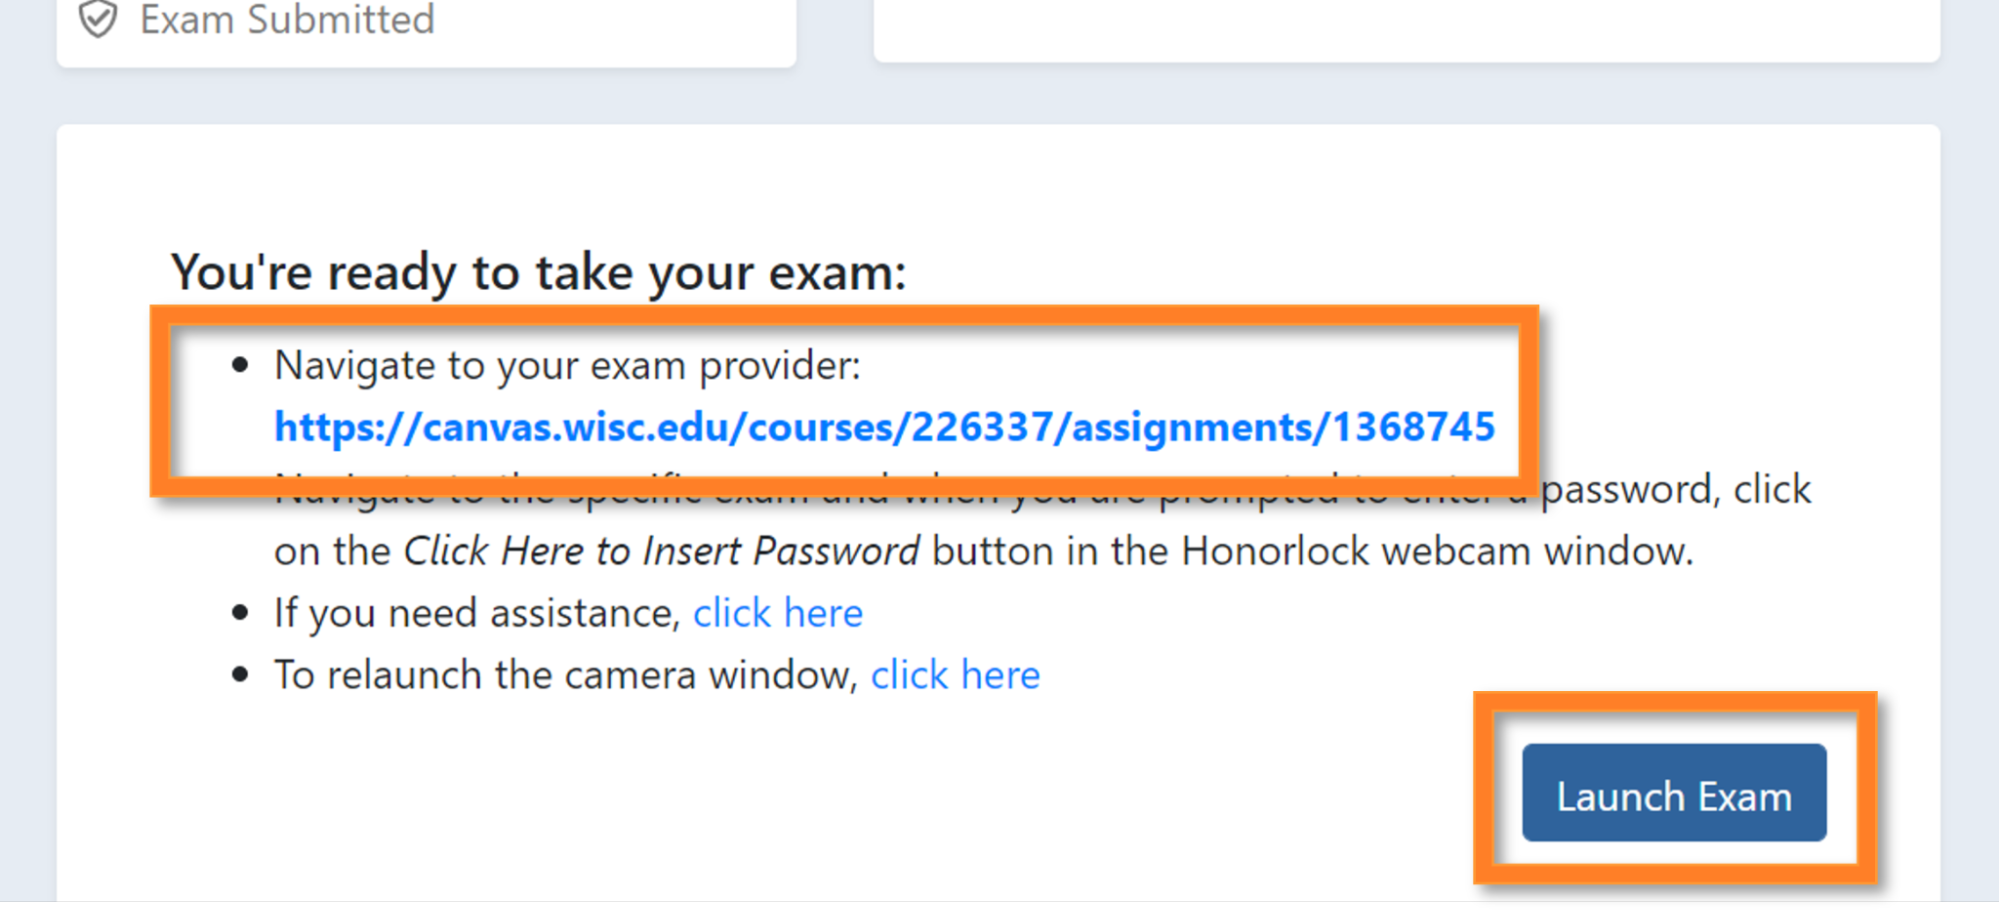 Launch exam button or click on the link